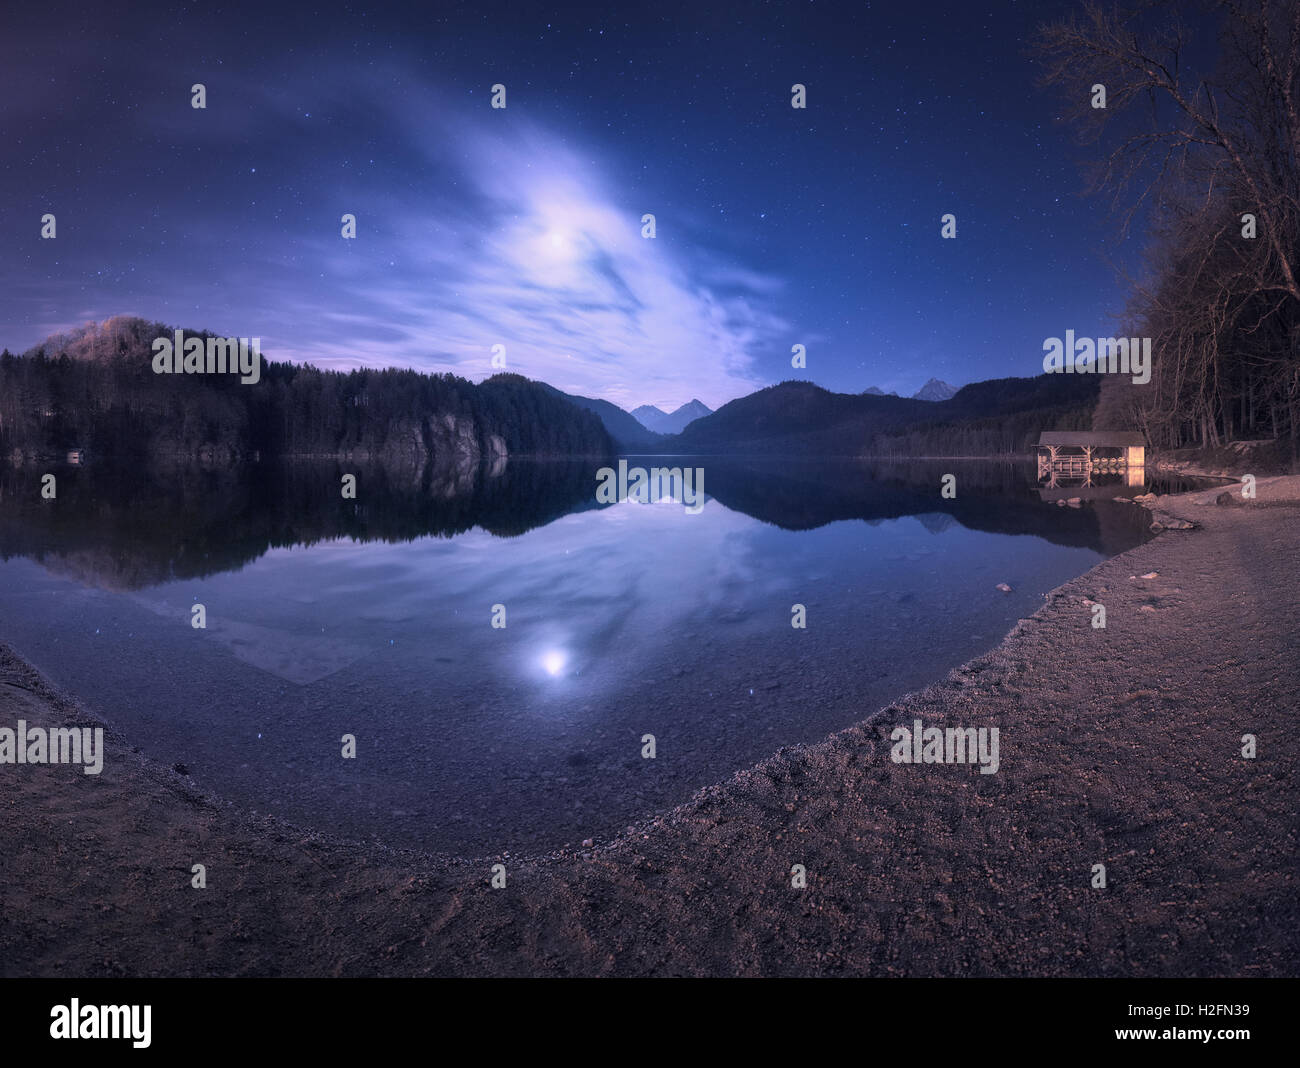 Colorful night landscape with lake, mountains, forest, stars, full moon, purple sky and clouds reflected in water. Spring night Stock Photo